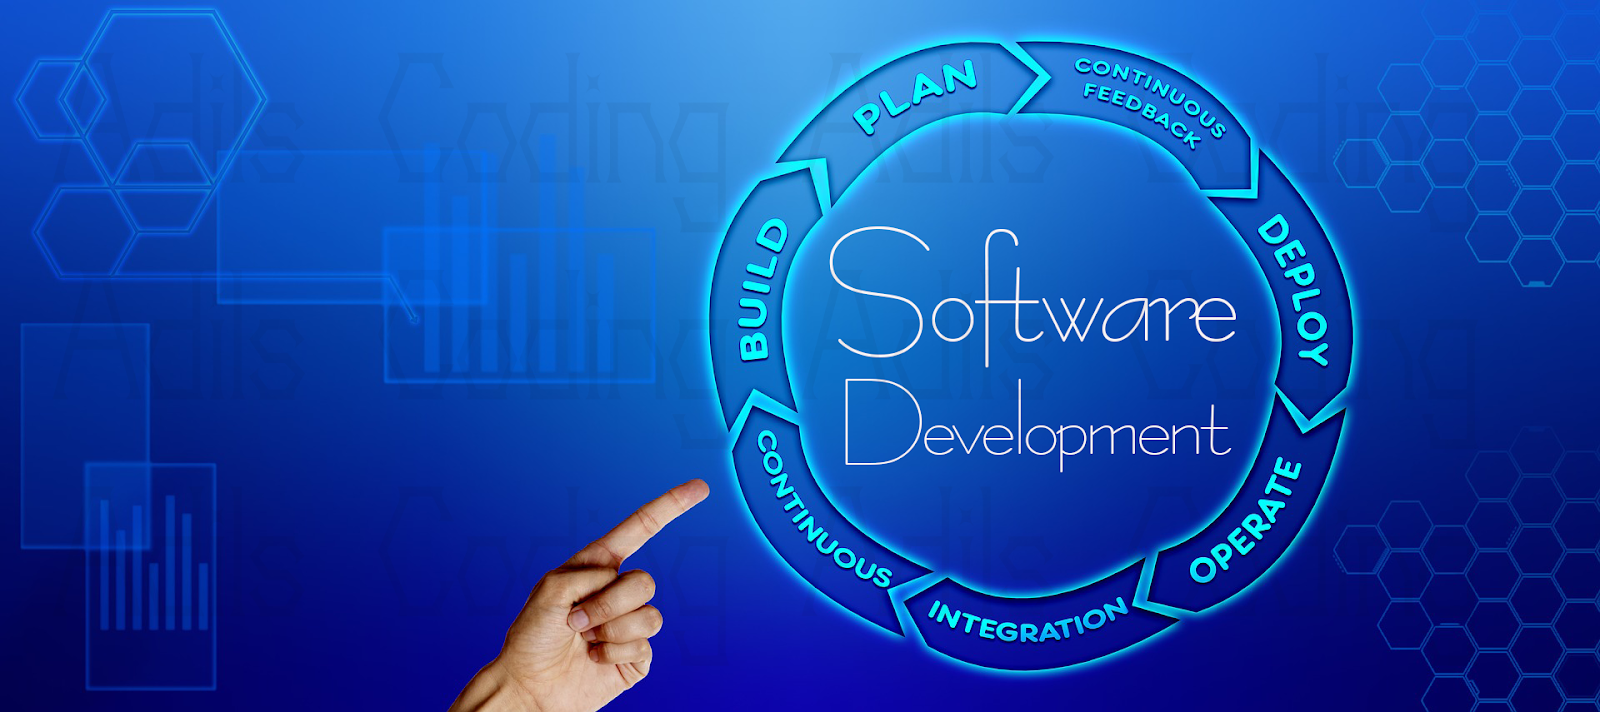 software_development Image not Available